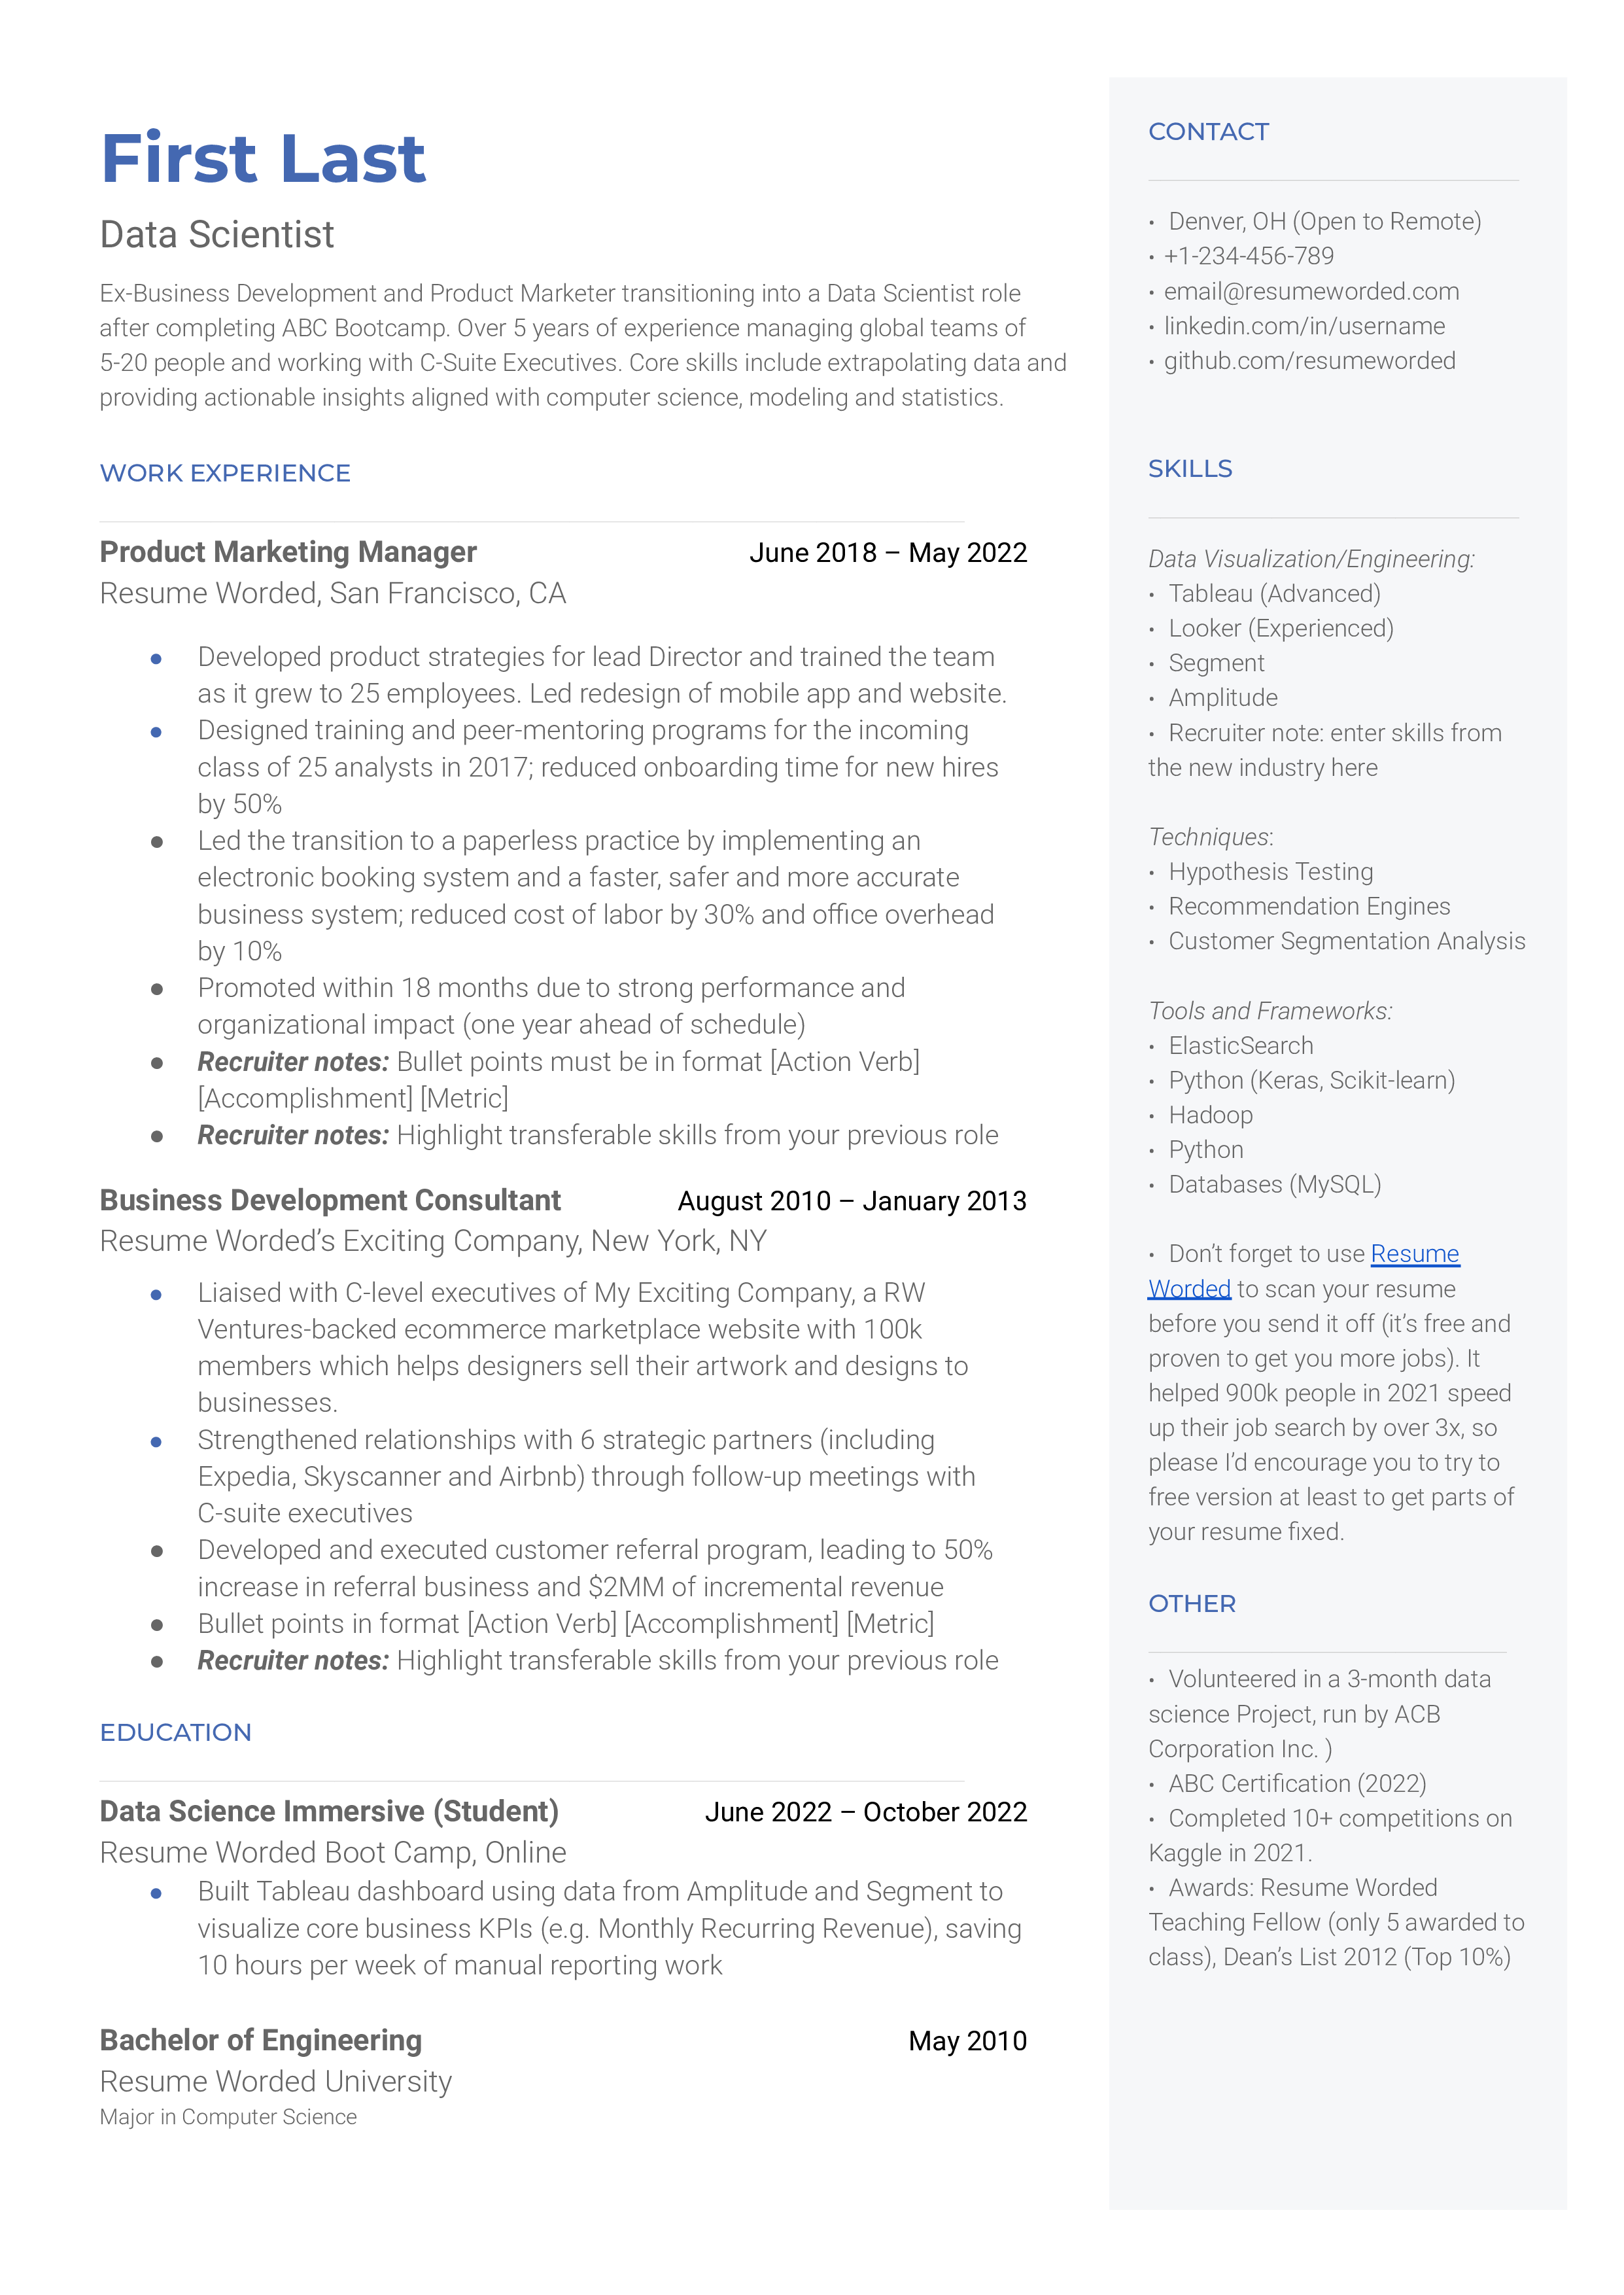 A professional CV optimized for a transition into data science roles.